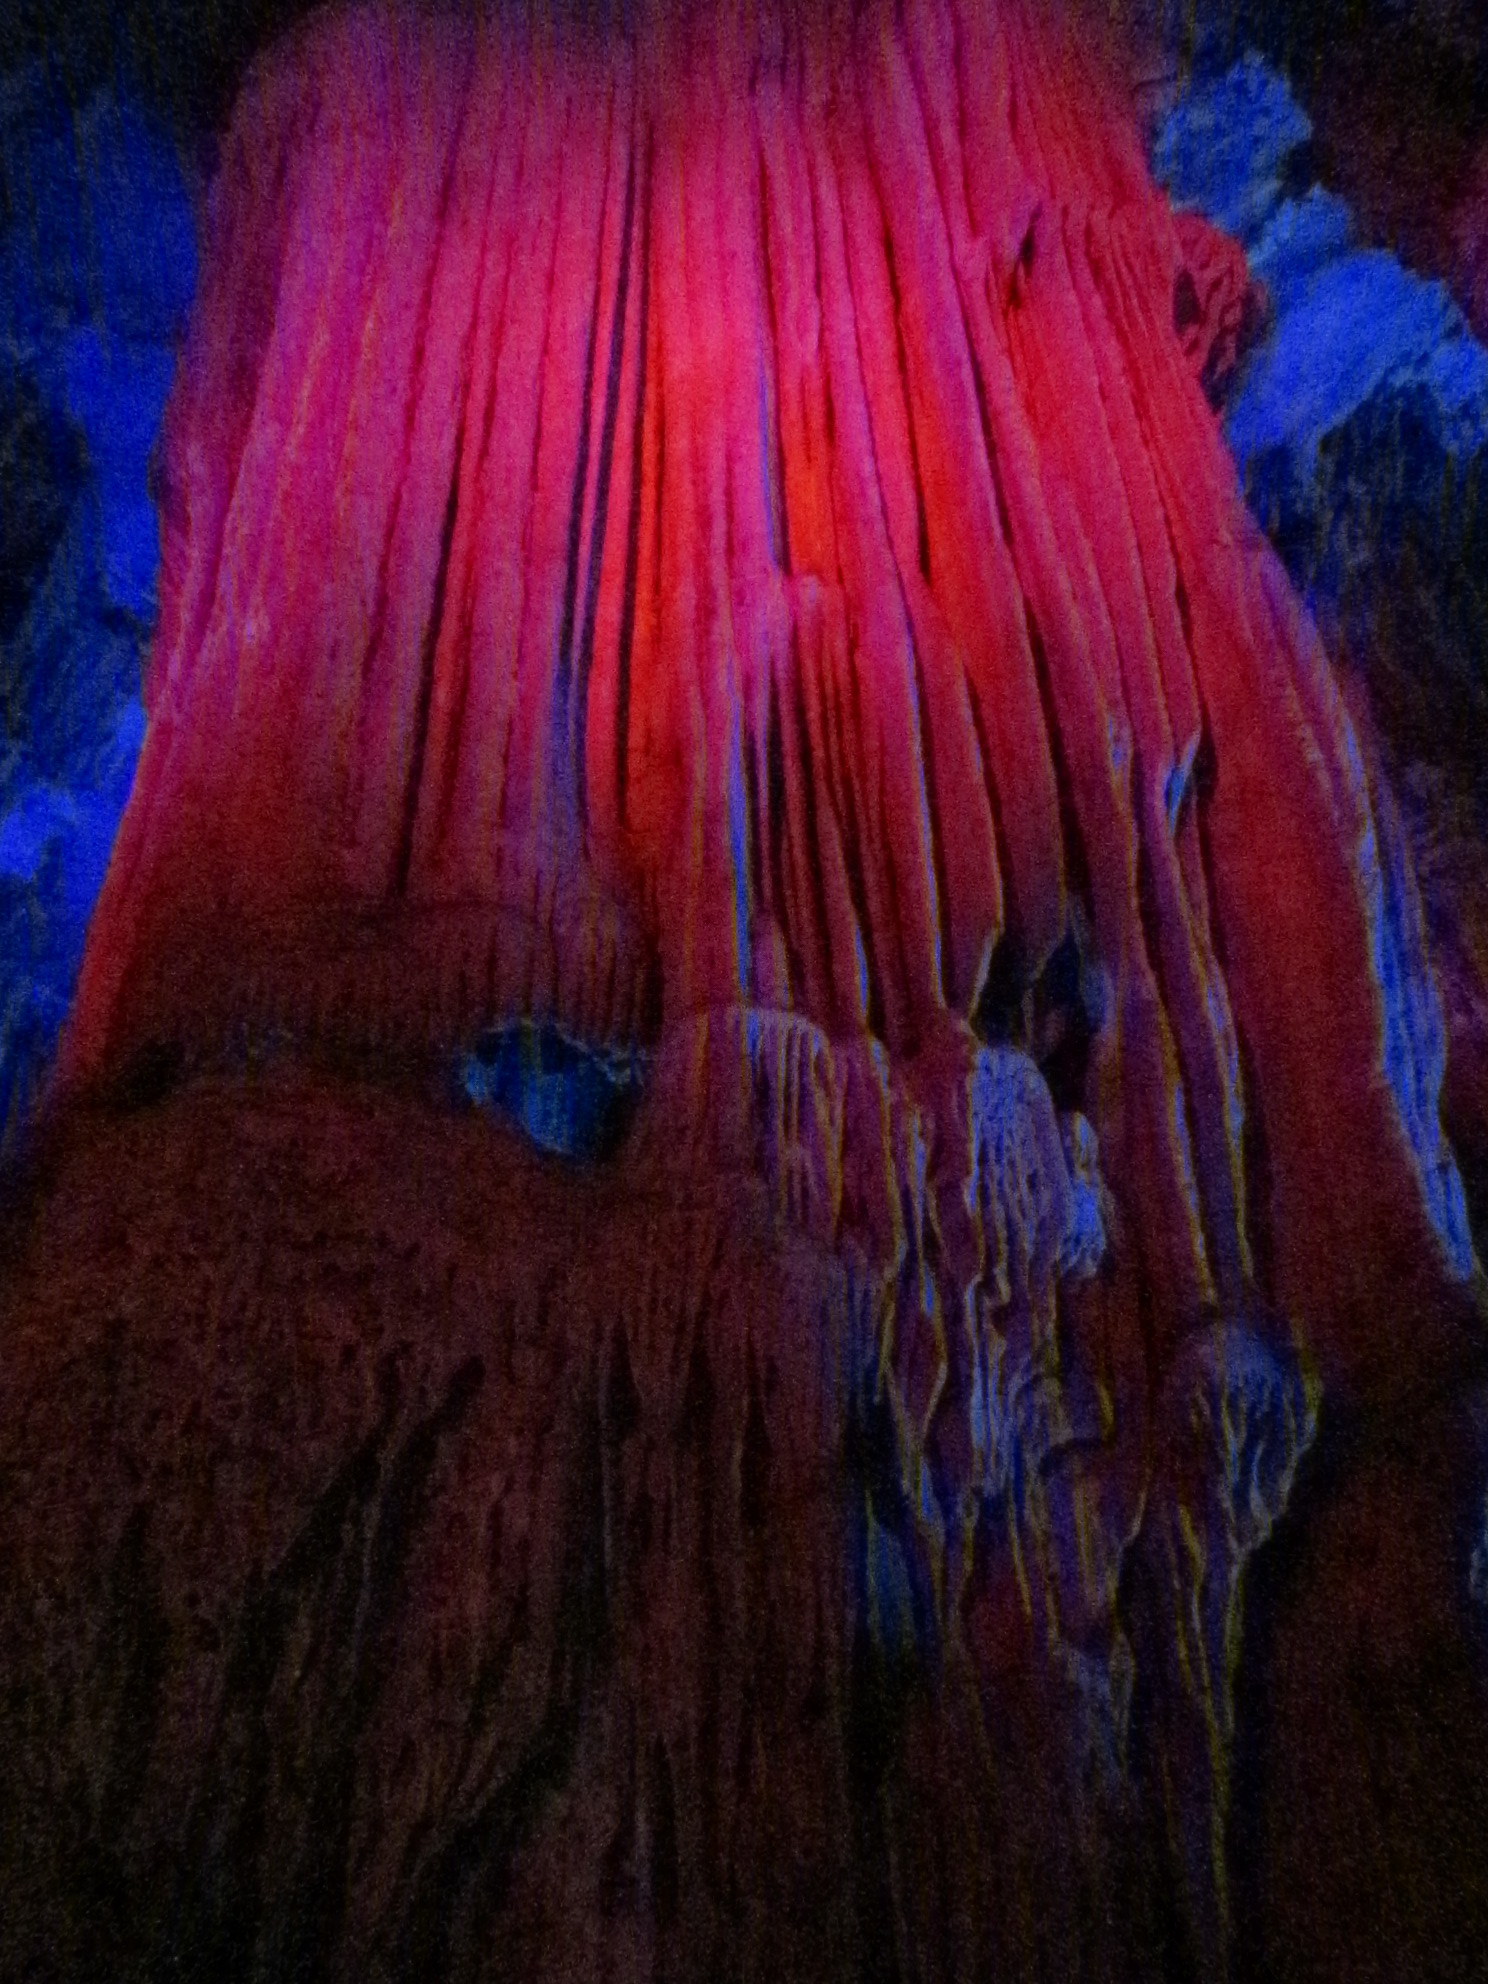 Beautiful formations, lit up with red lights.  These took thousands of years to form.  Nature is so cool :)